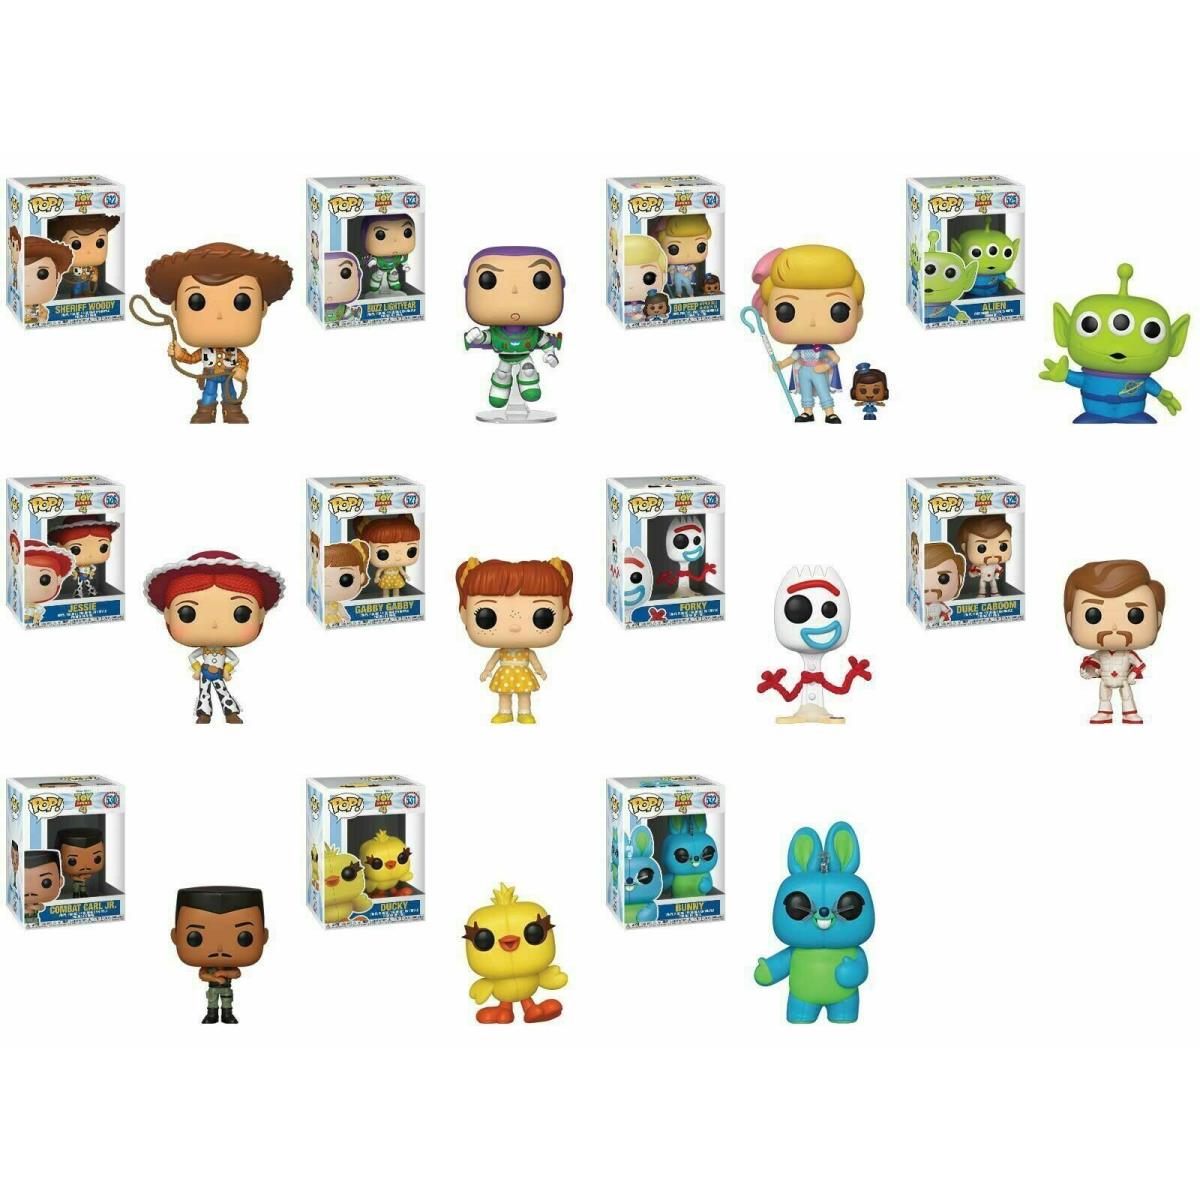 Toy Story 4 Funko Pop Collectible Figure Set of 11